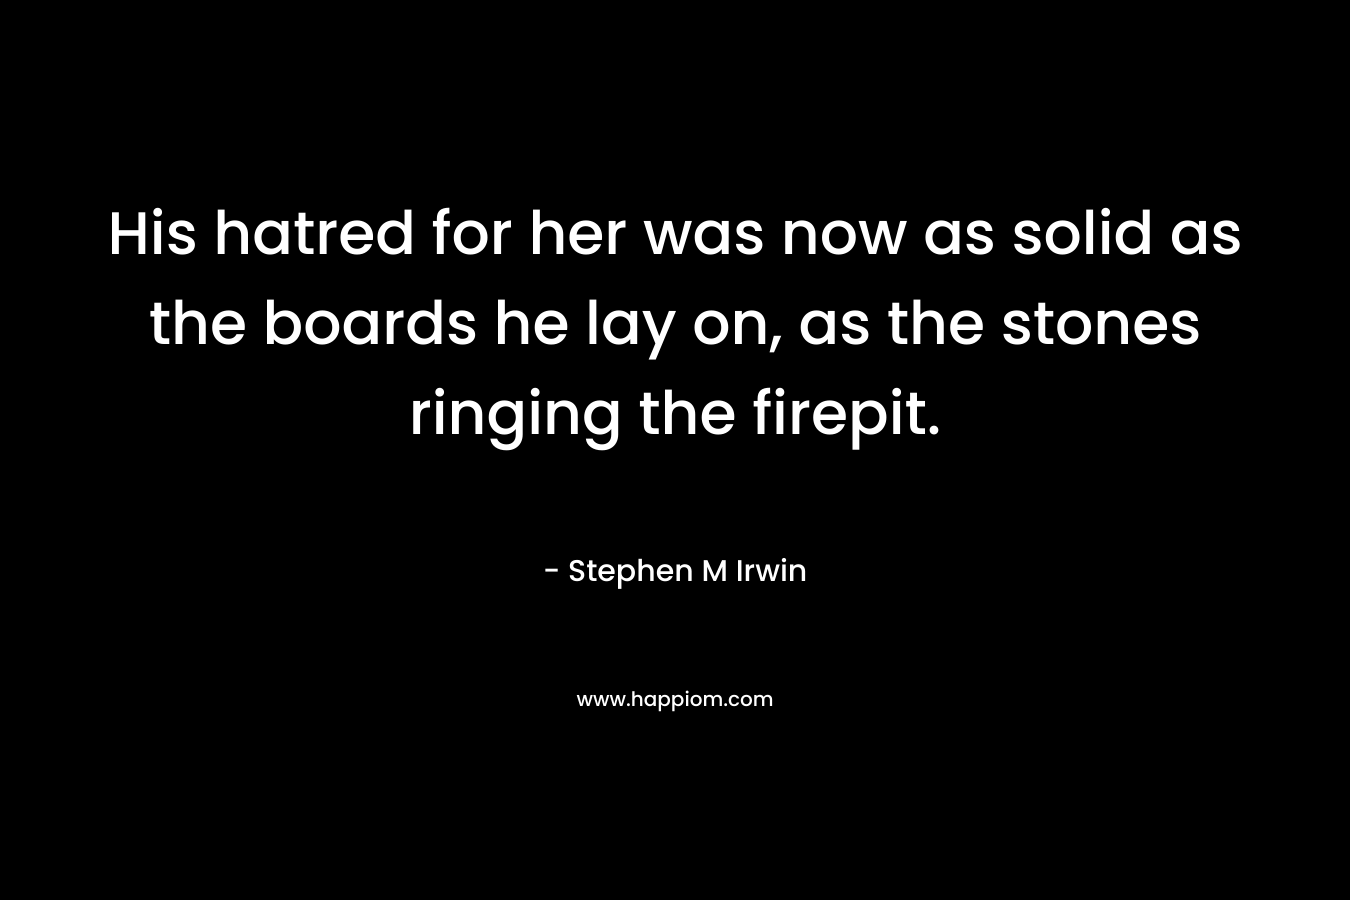 His hatred for her was now as solid as the boards he lay on, as the stones ringing the firepit. – Stephen M Irwin